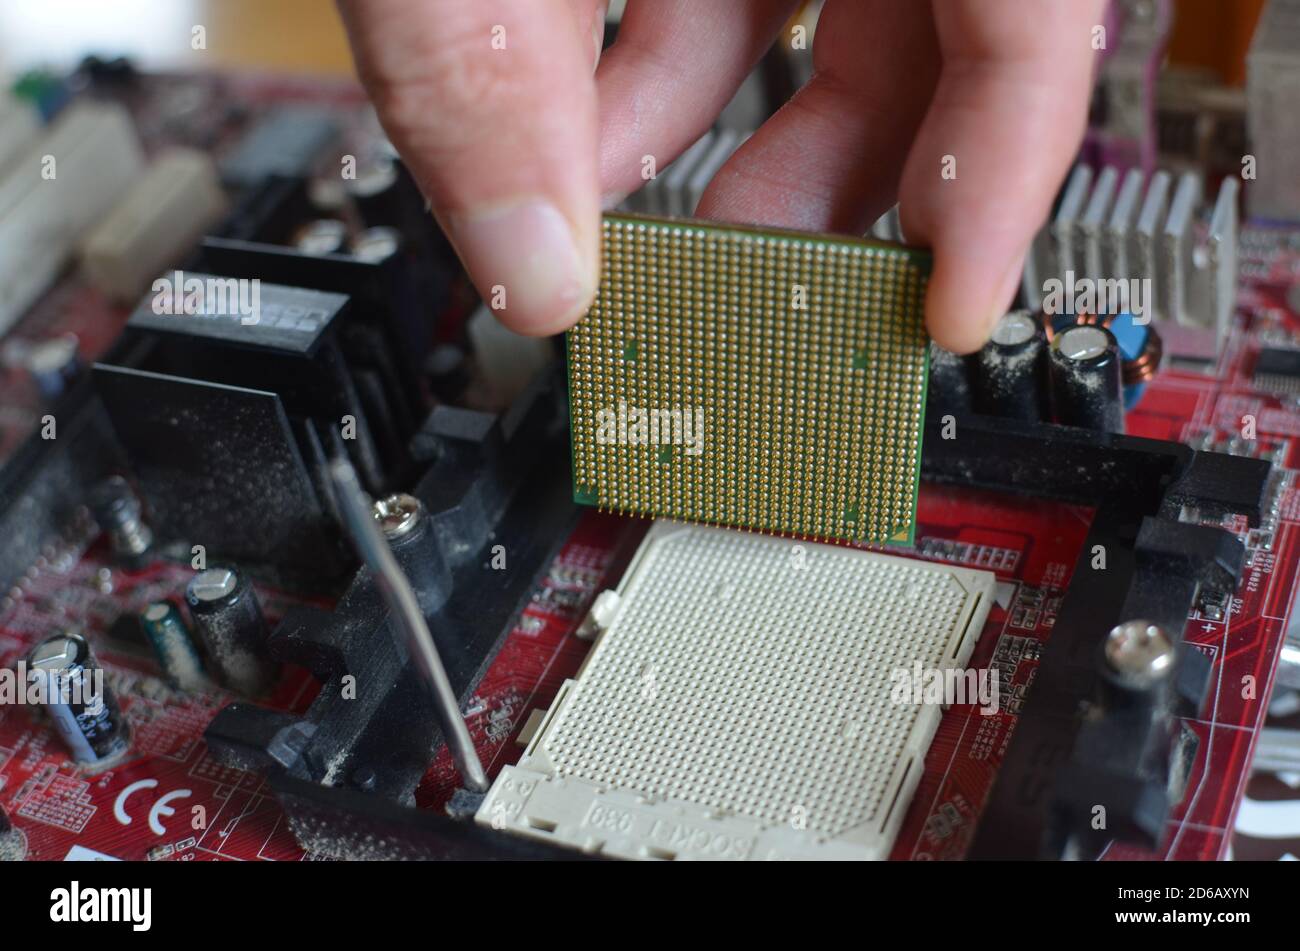 A hand removing a CPU (processor chip) from the motherboard of an old computer. Stock Photo